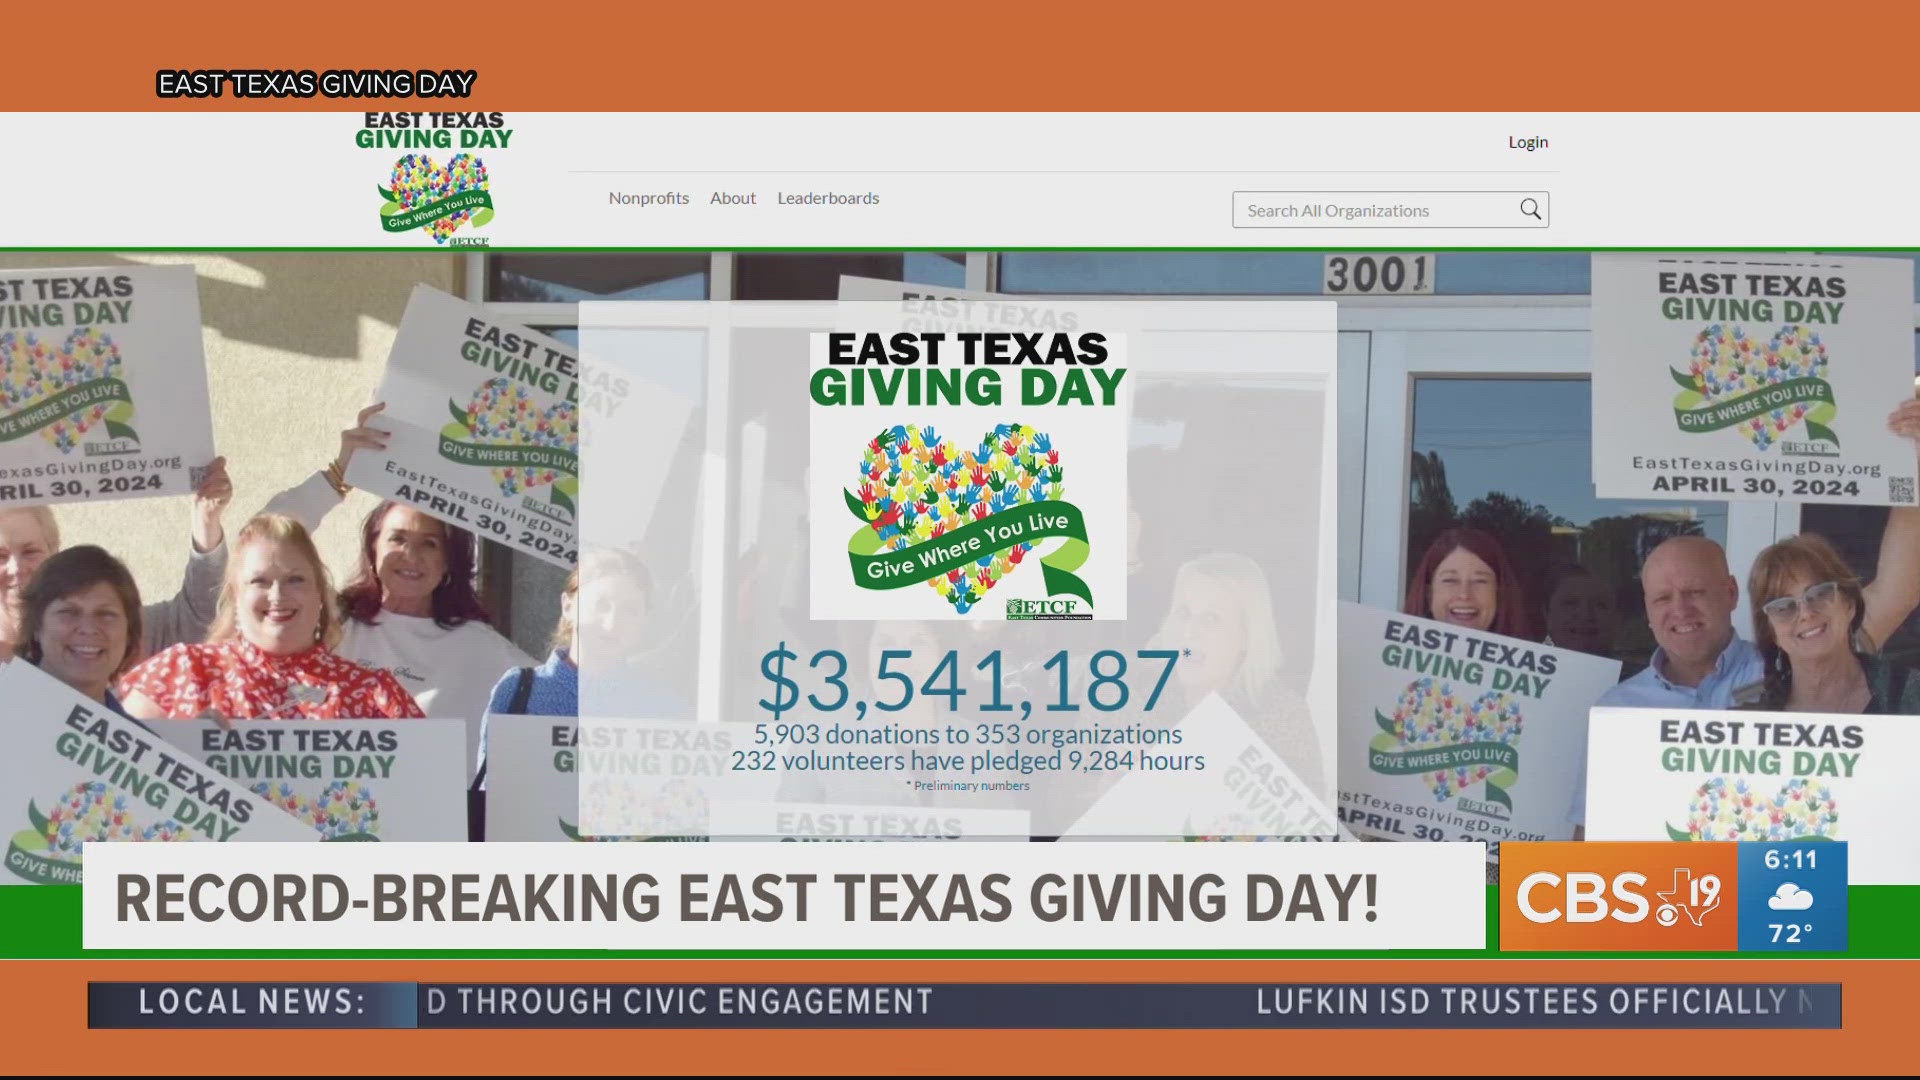 East Texas Giving Day raises more than $3.5 million for local nonprofits